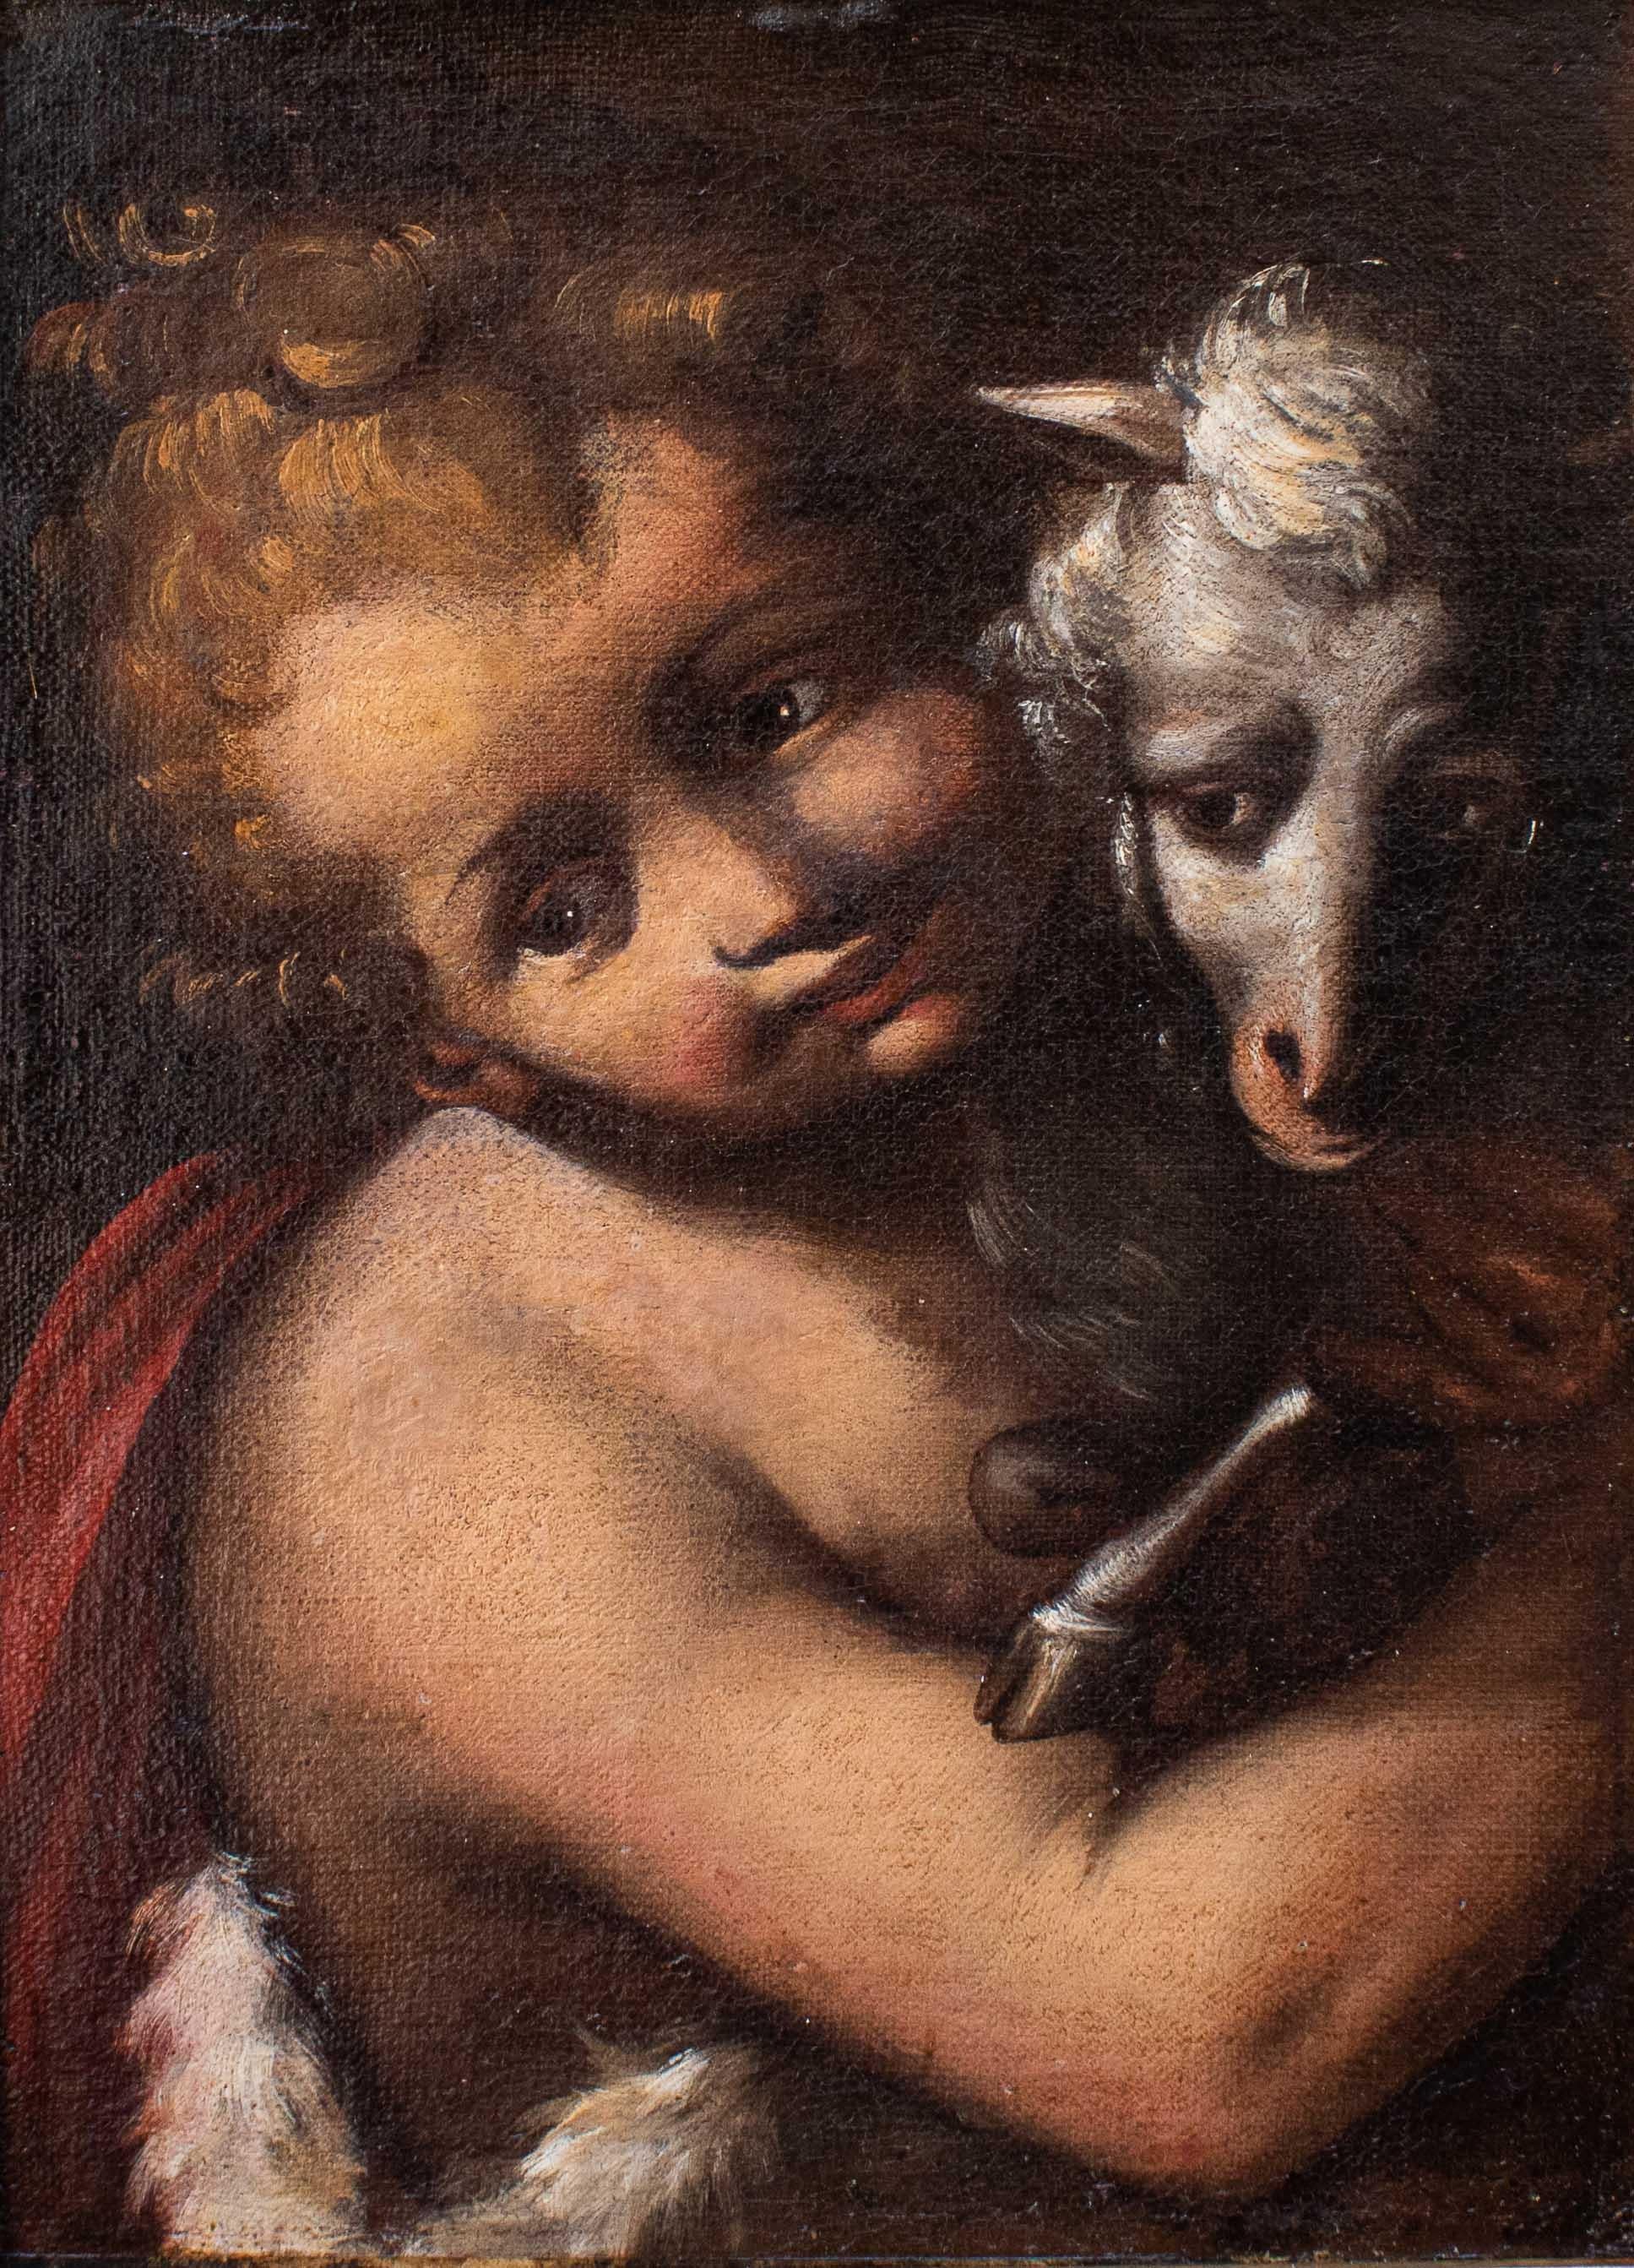 Area of ??Giulio Cesare Procaccini (Bologna, 1574 - ivi, 1625)
San Giovannino with lamb
Oil on canvas, cm 43 x 21 cm - C: 51 x 38

The Baroque invitation to dynamism and sincere expressionism reveals the implicit reference to Giulio Cesare